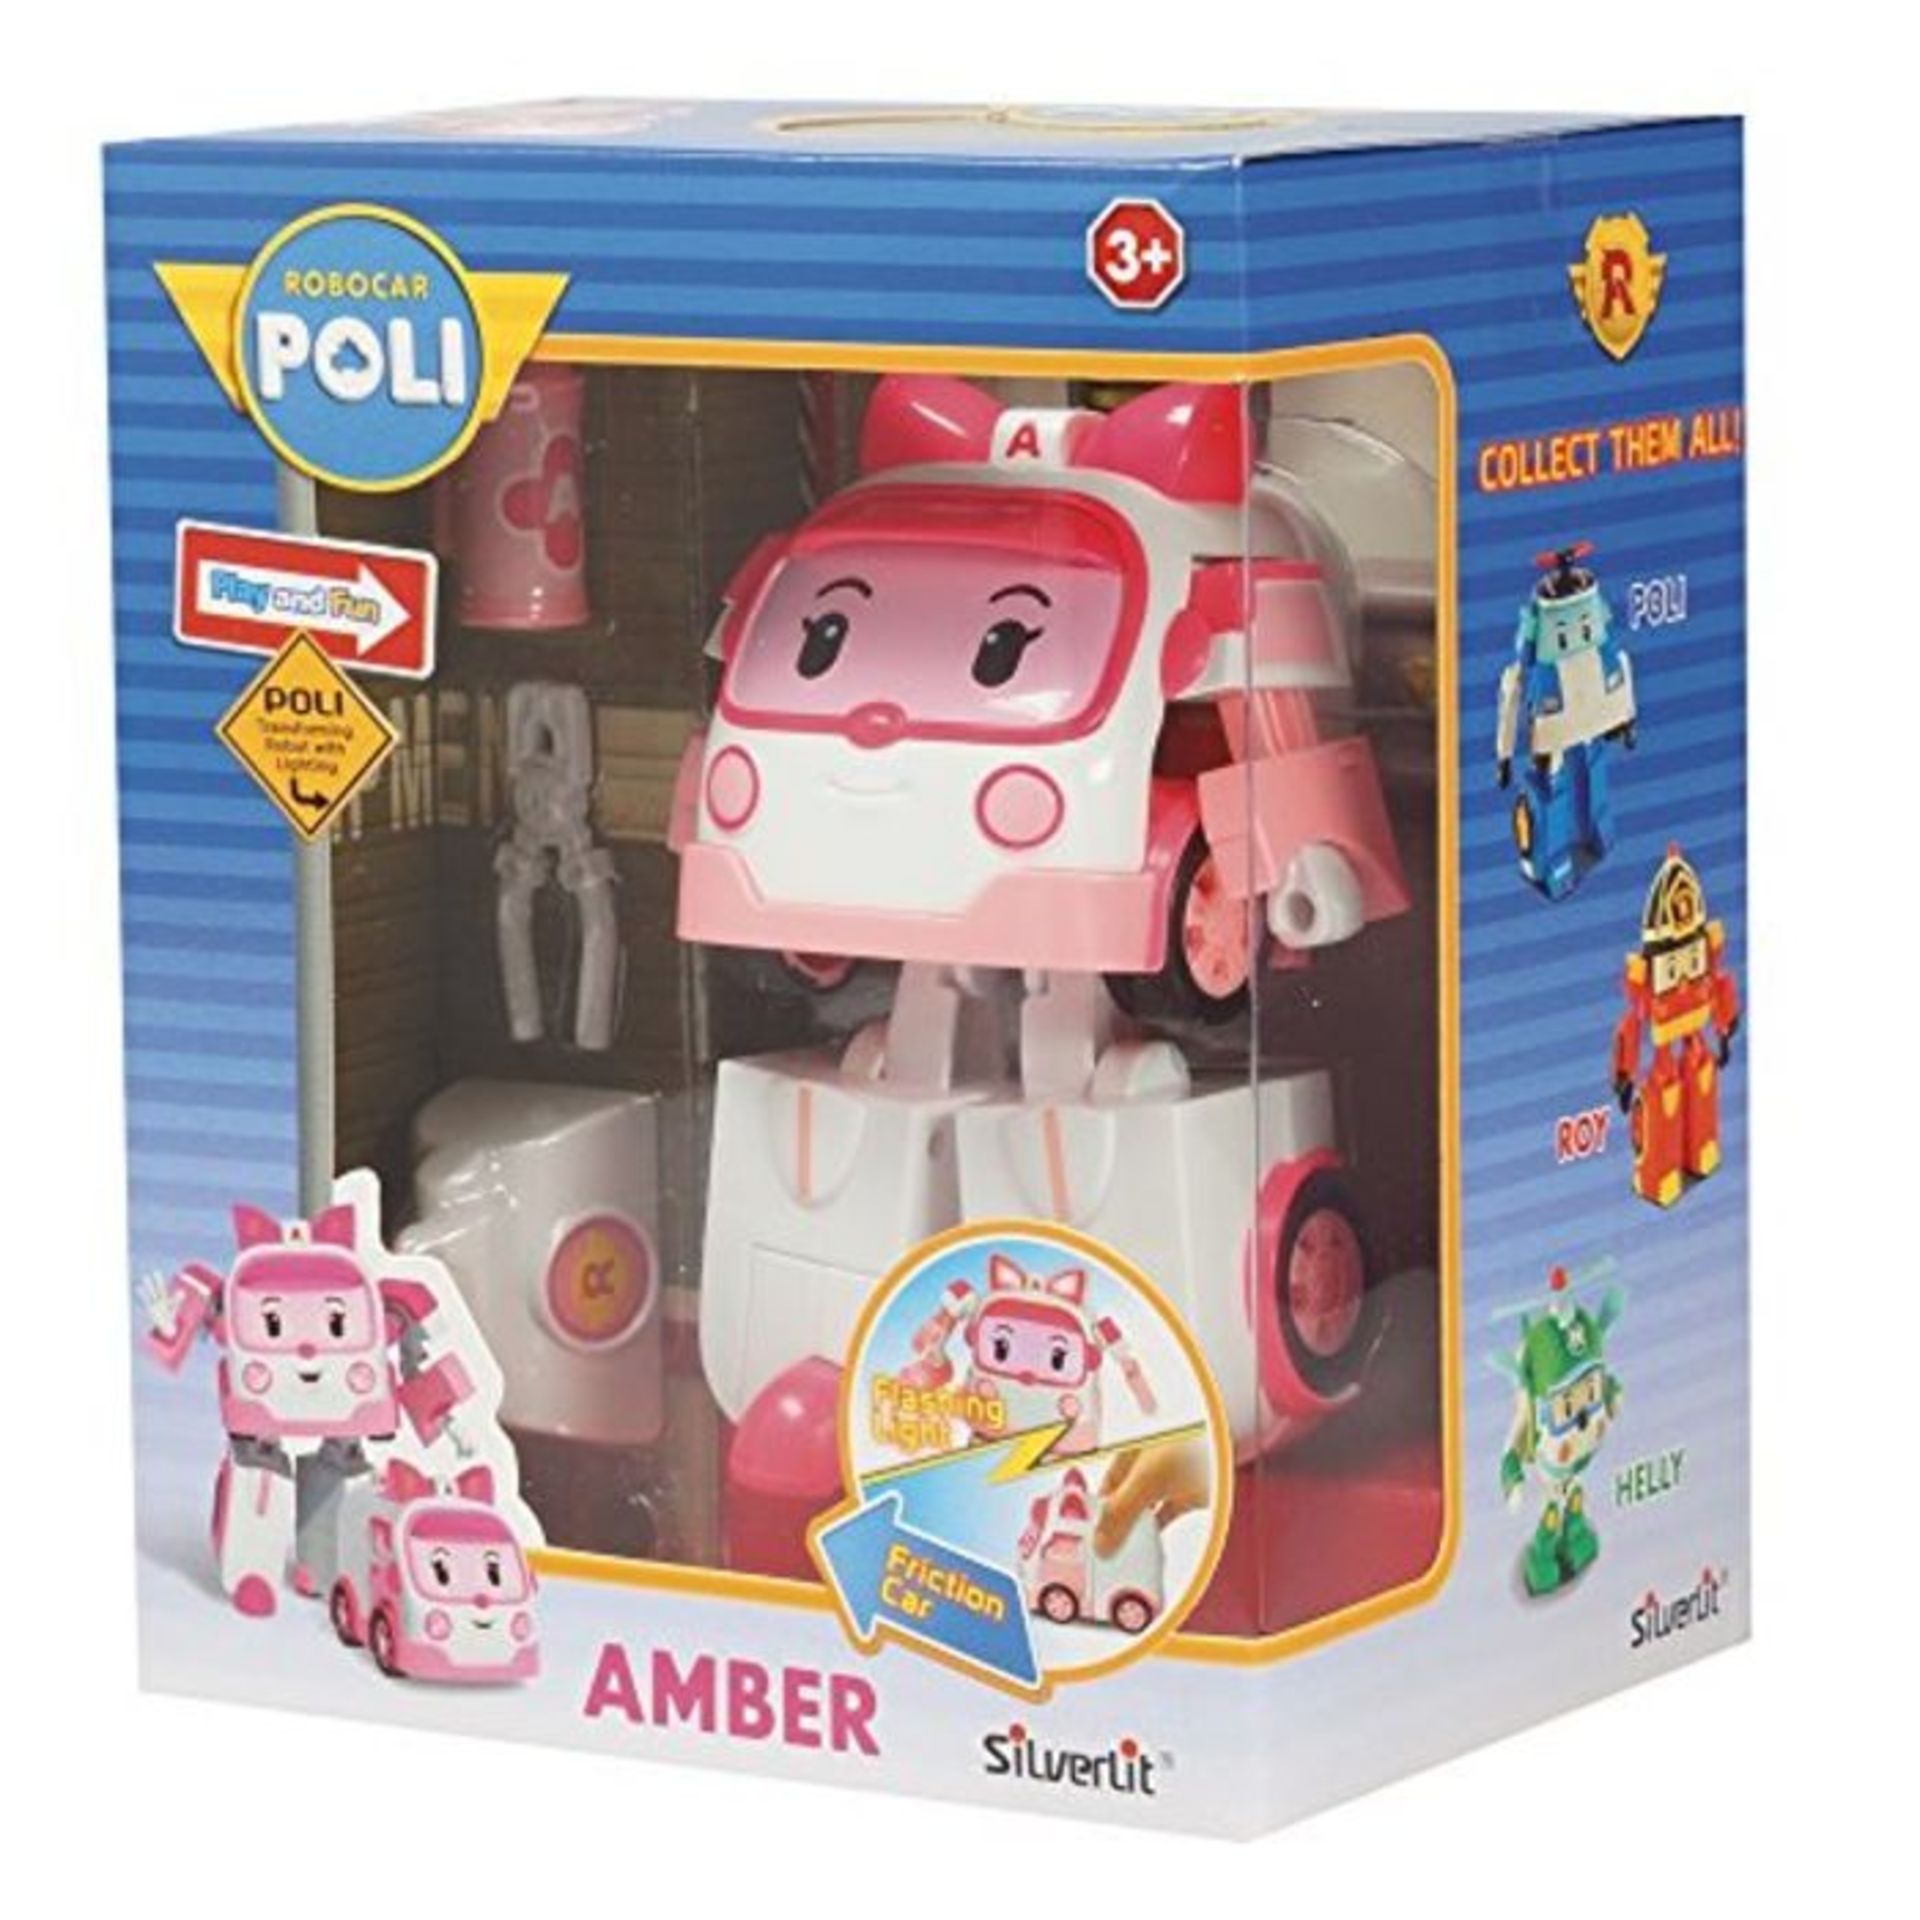 Rocco Giocattoli 83095 - Robocar Poli Amber Transformable Character with Lights